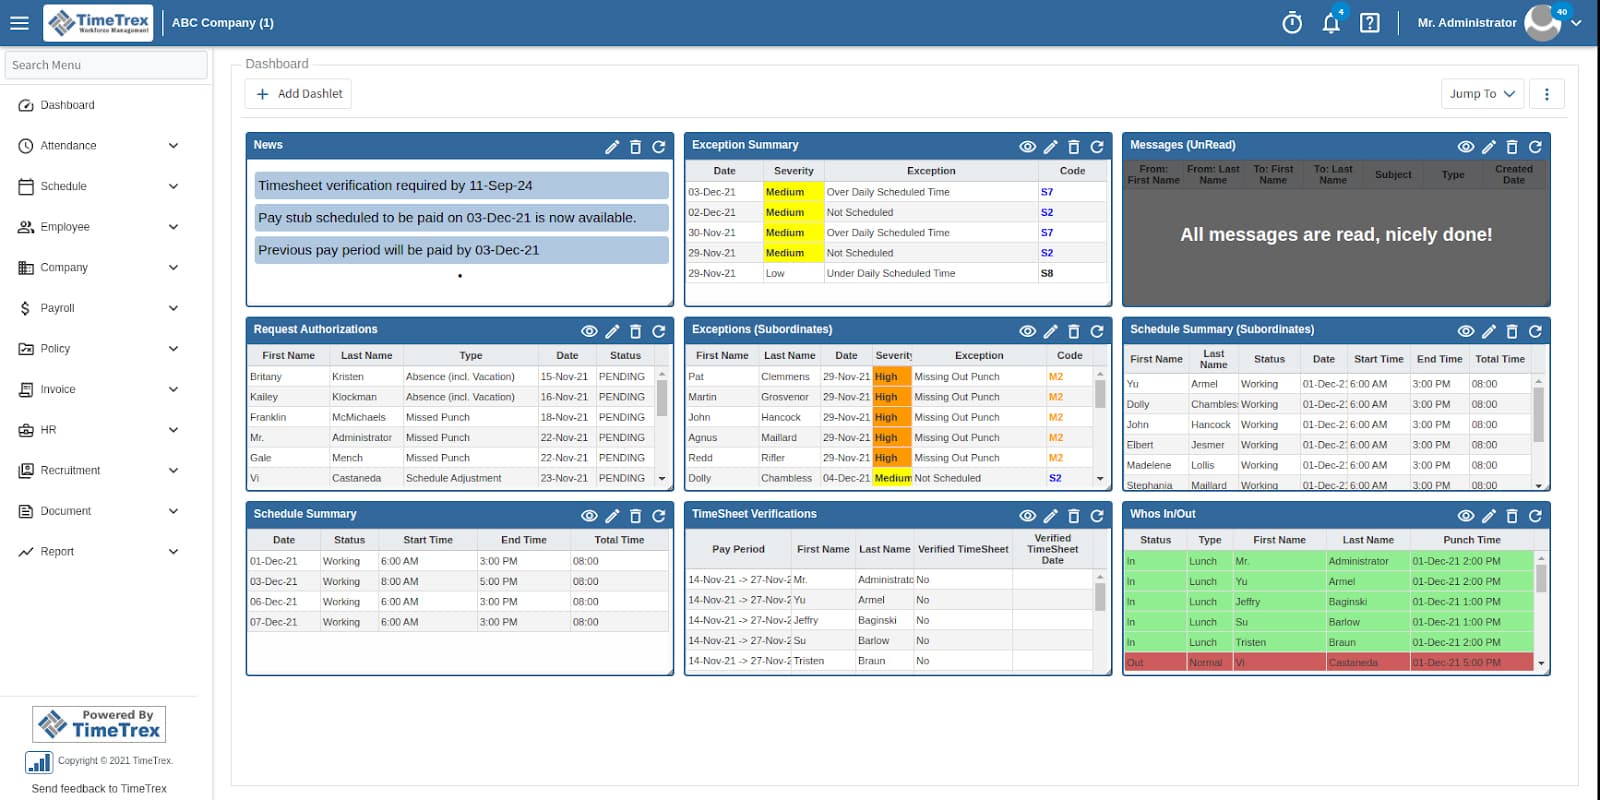 Sample image of TimeTrex’s main dashboard with widget like alerts, staff schedules, real-time attendance data and more.